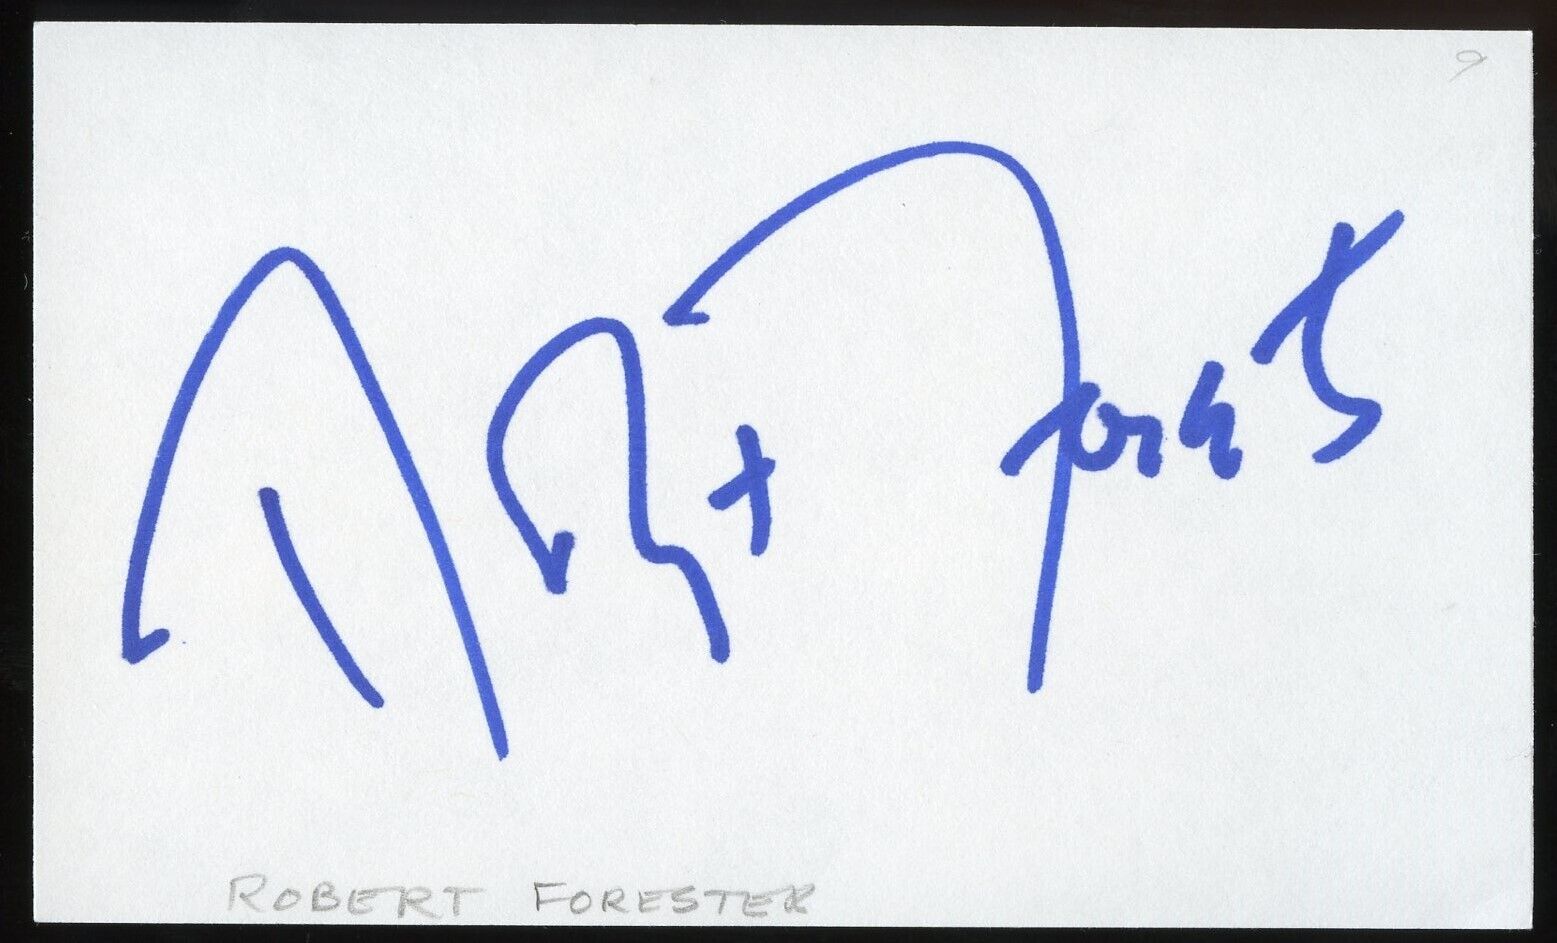 Robert Forster d2019 signed autograph 3x5 Cut American Actor in in Medium Cool